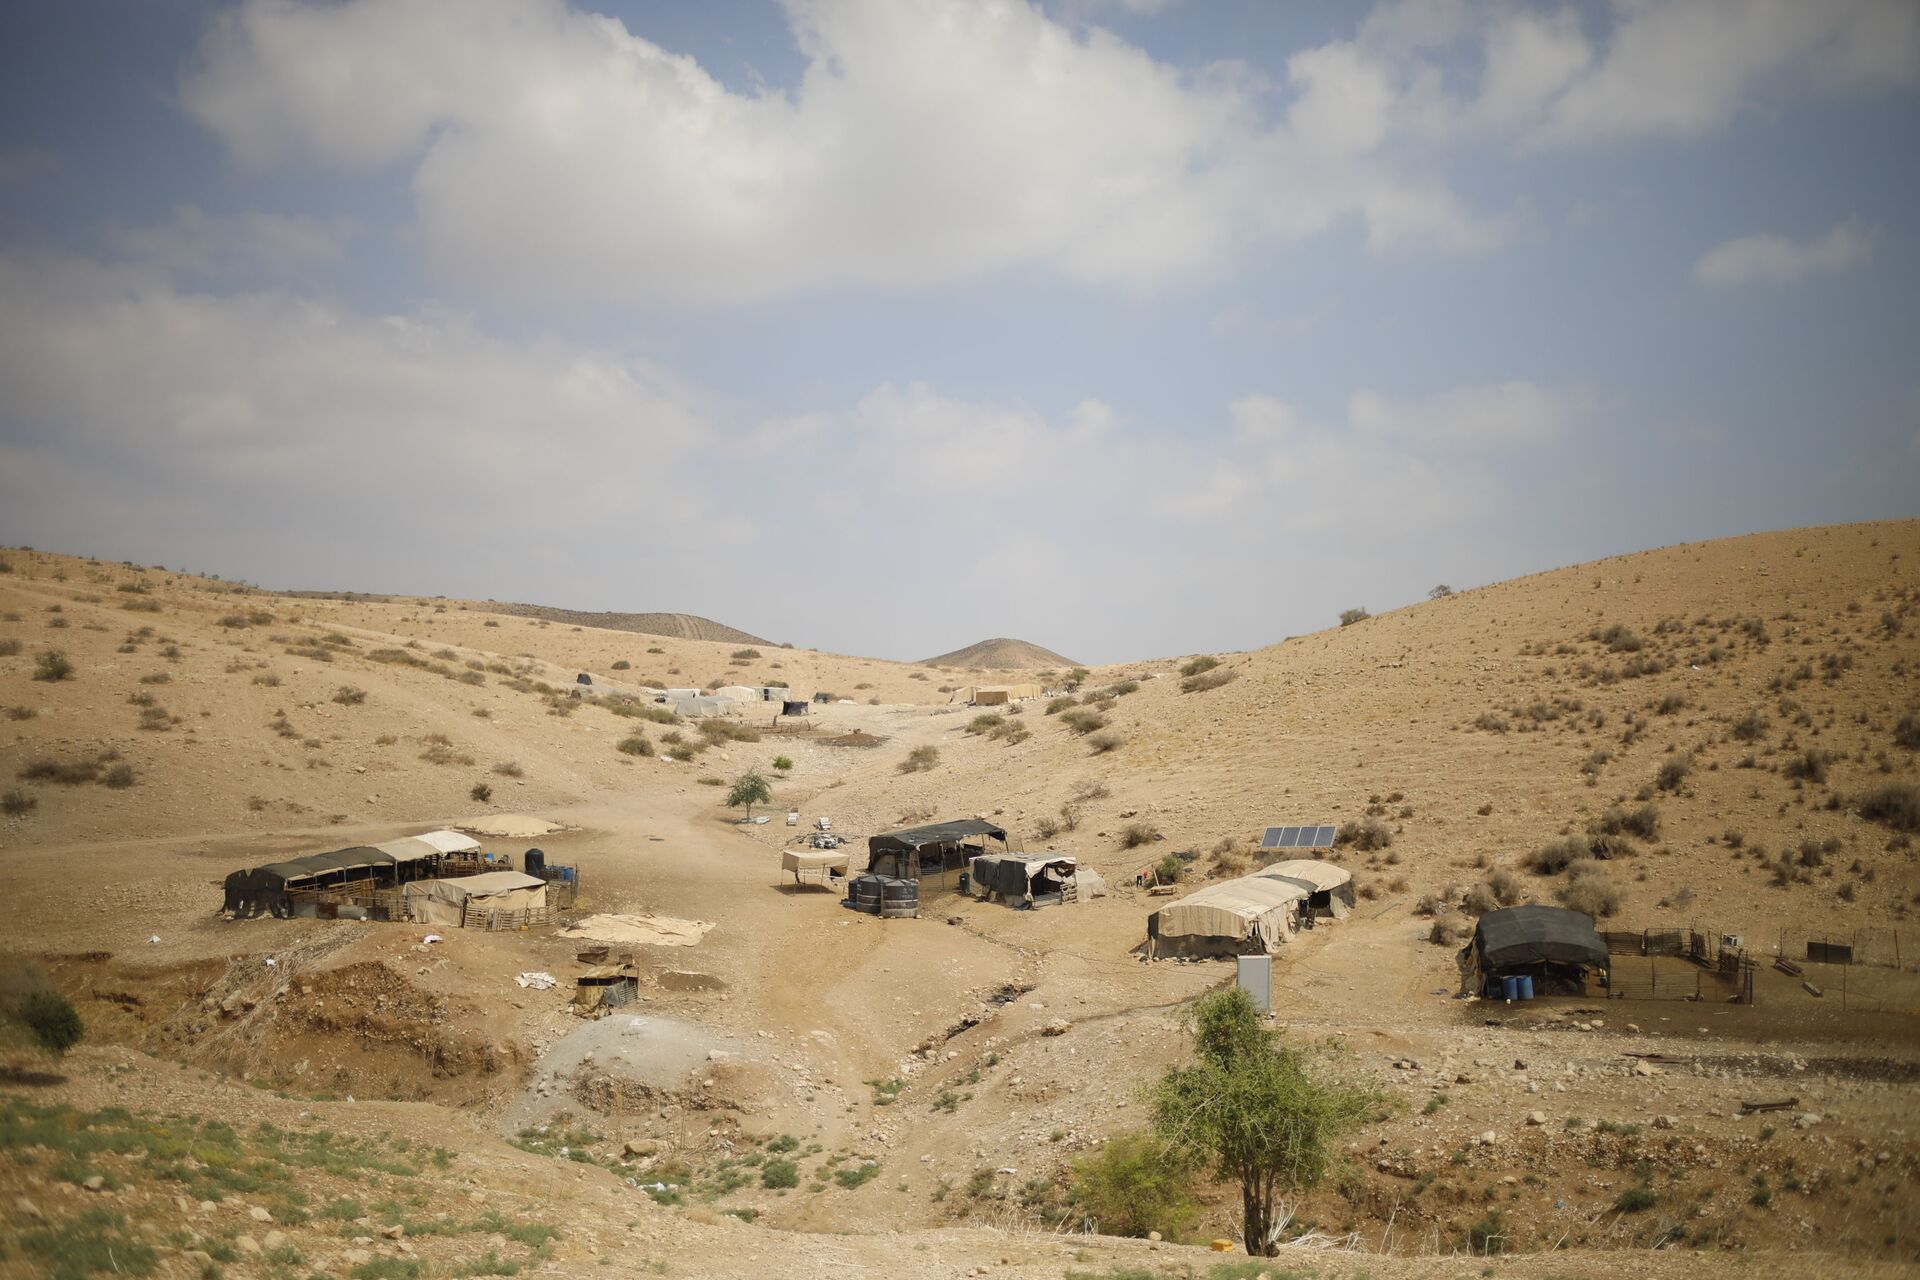 Palestinian Bedouin homes are seen in the Israeli-occupied West Bank, Wednesday, Sept. 11, 2019. Israeli Prime Minister Benjamin Netanyahu’s election eve vow to annex the Jordan Valley if he is re-elected has sparked an angry Arab rebuke and injected the Palestinians into a campaign that had almost entirely ignored them. (AP Photo/Ariel Schalit) - Sputnik International, 1920, 23.11.2023